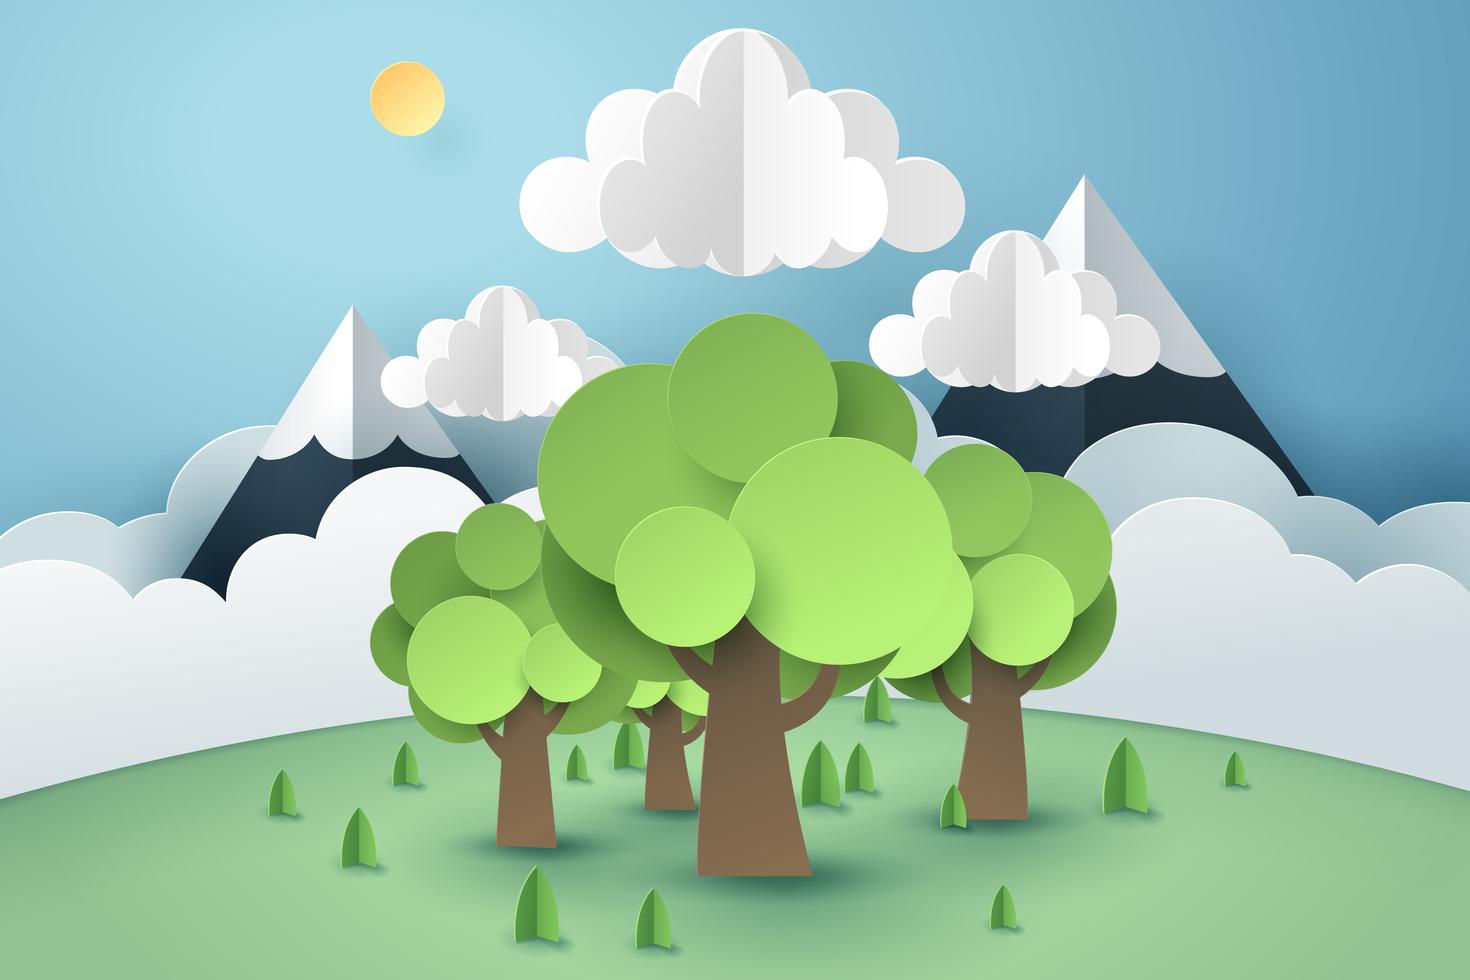 Forest and cloud, Paper art concept and world sustainable environment friendly idea vector